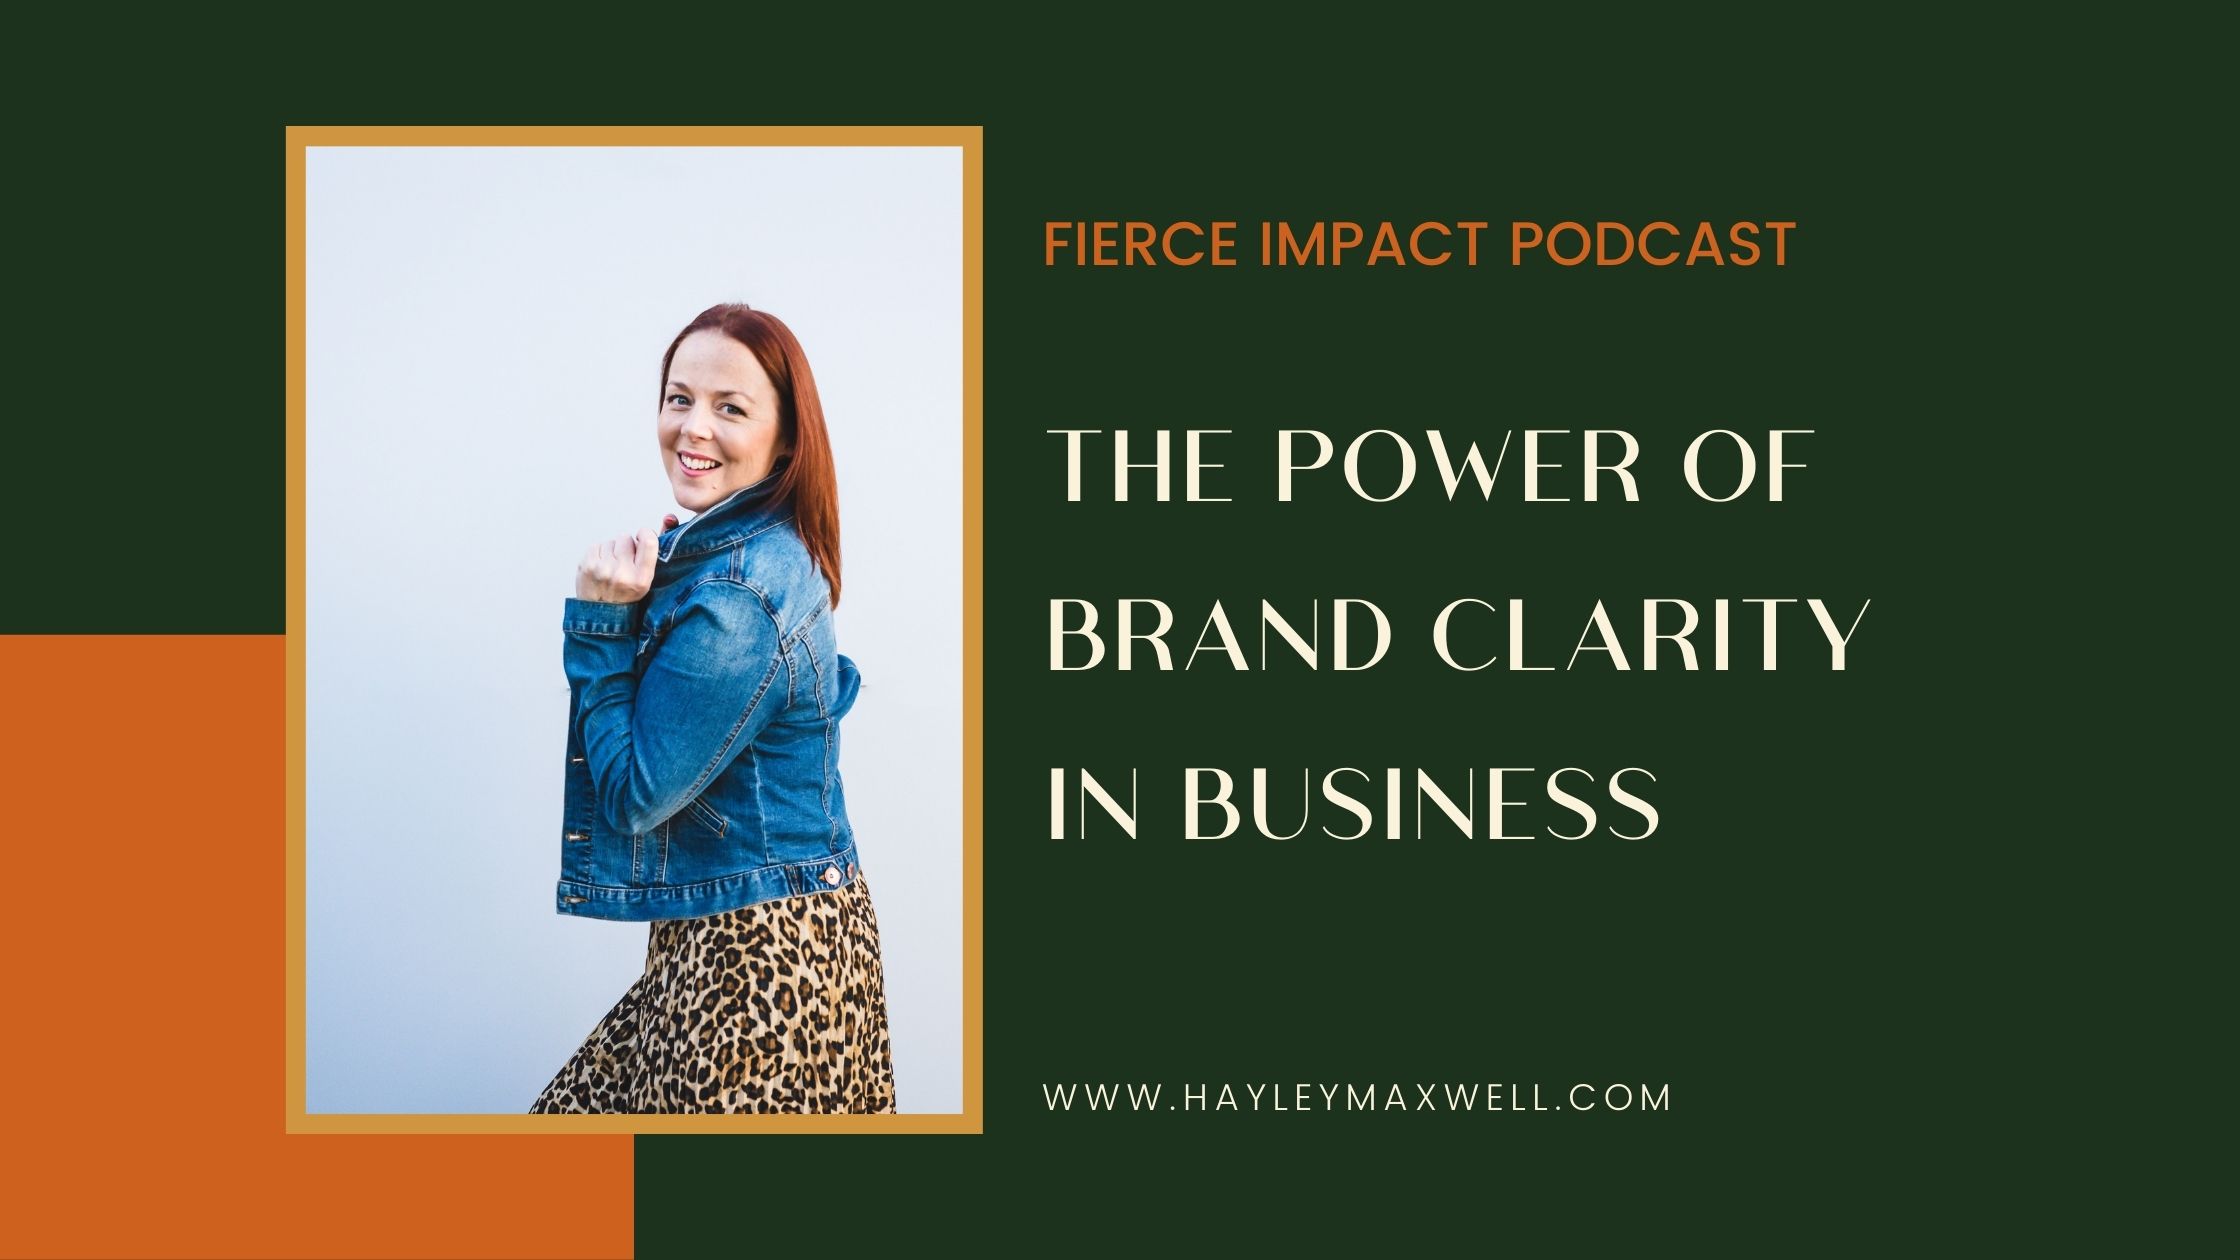 The power of brand clarity in business - Fierce Impact podcast